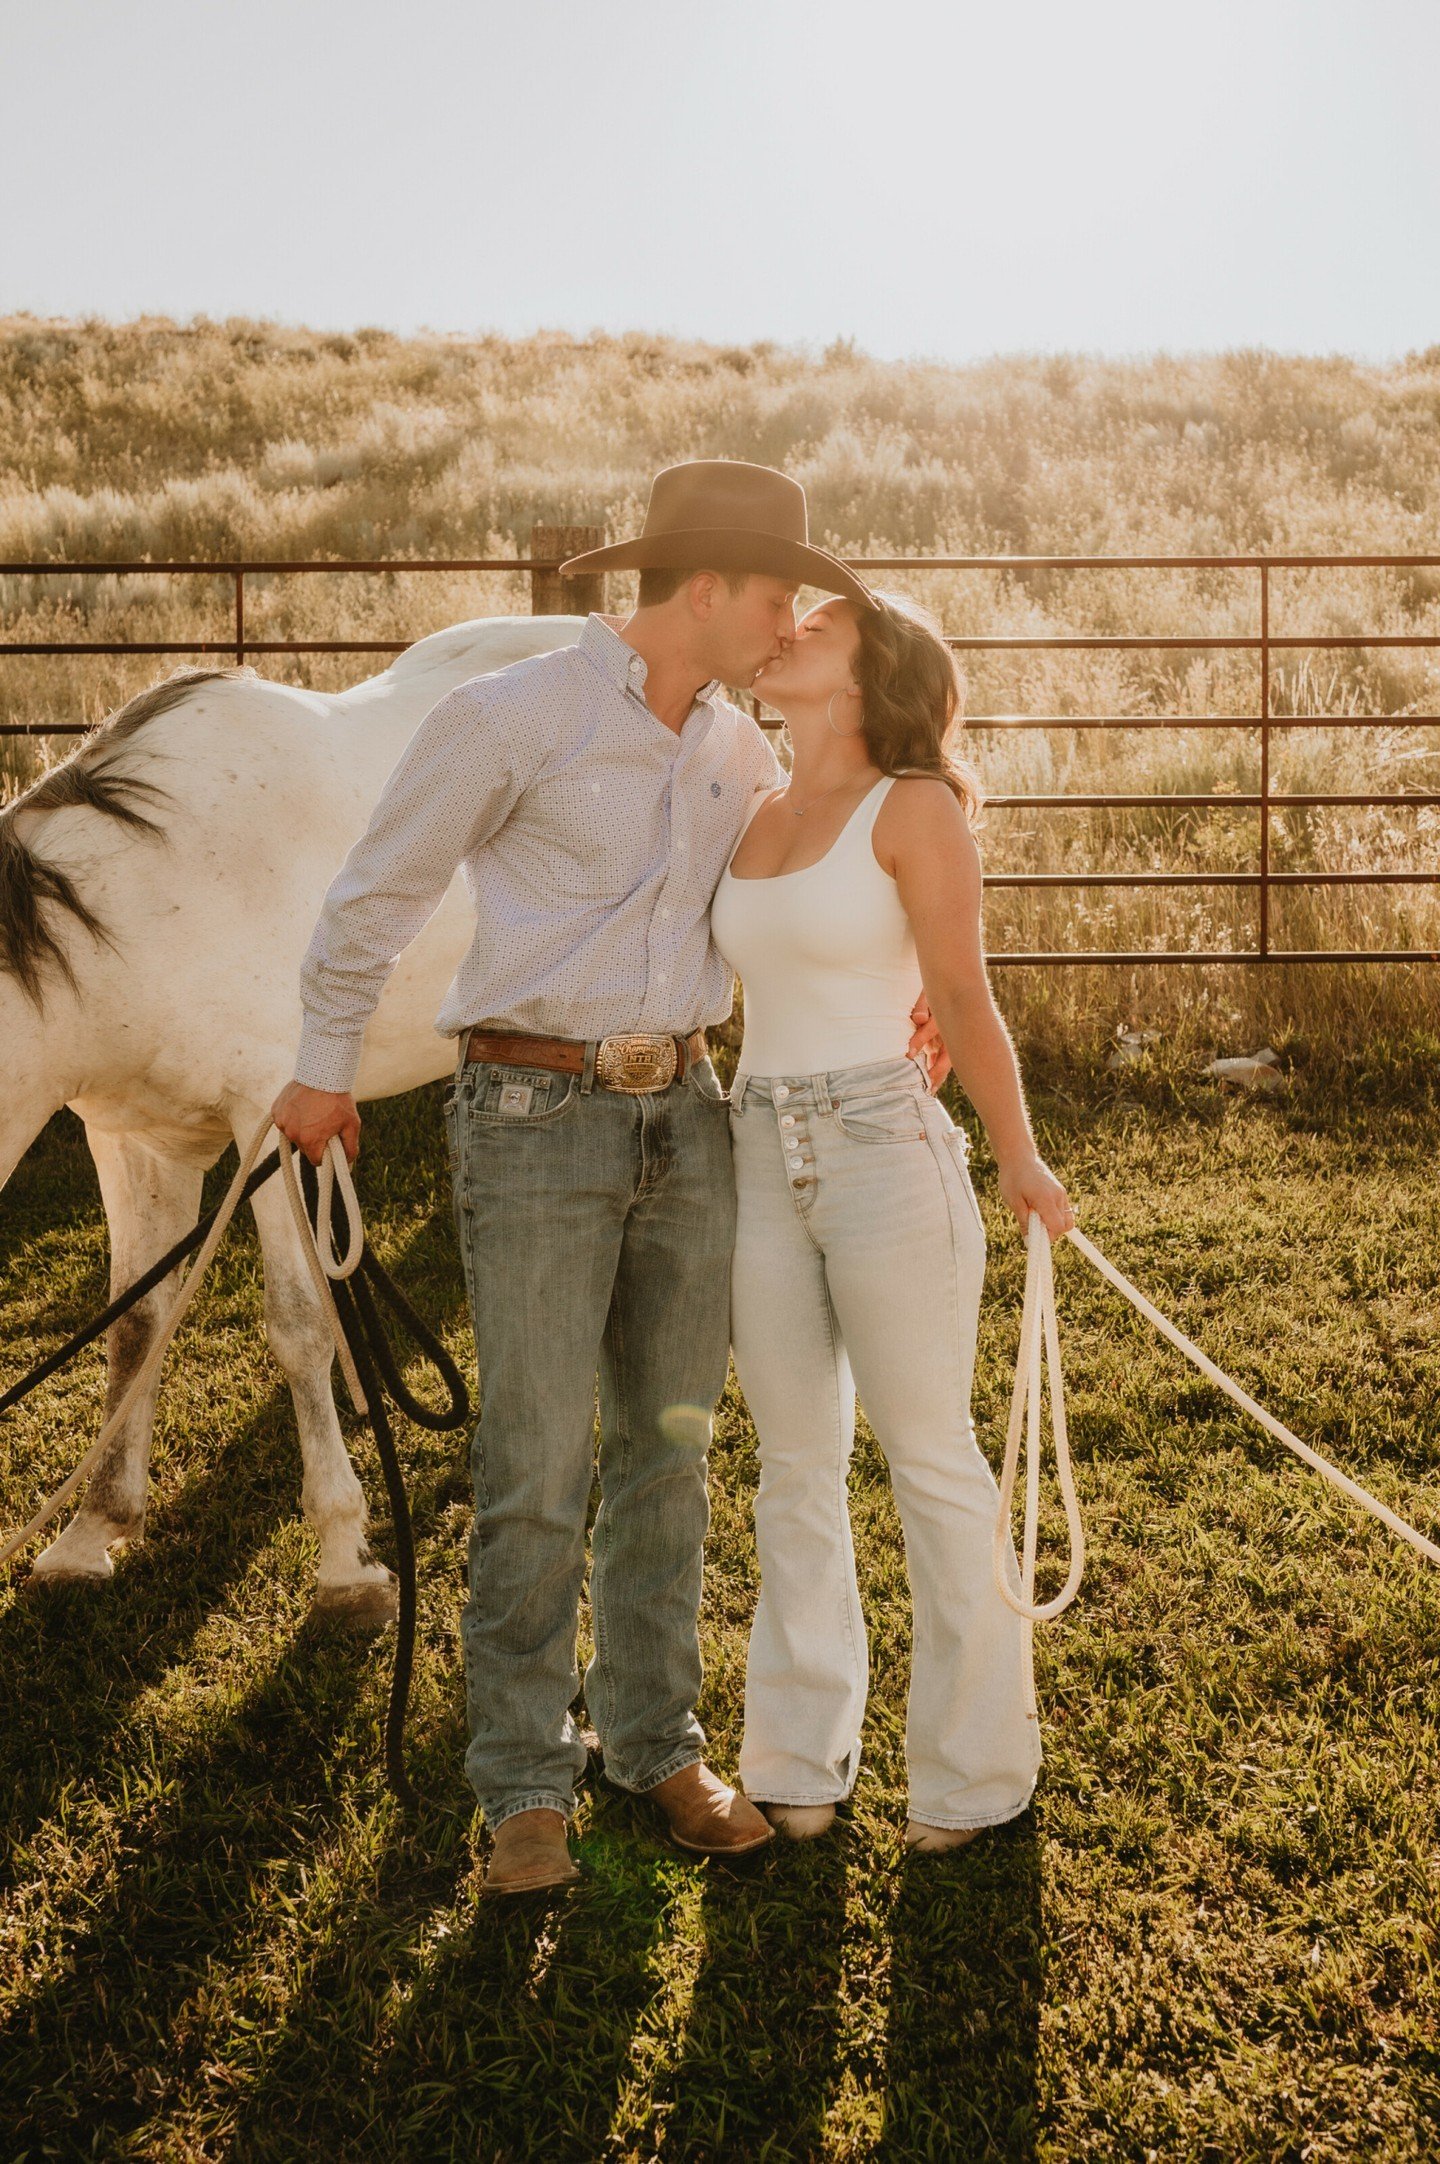 life's better with you, cowboy 🤍